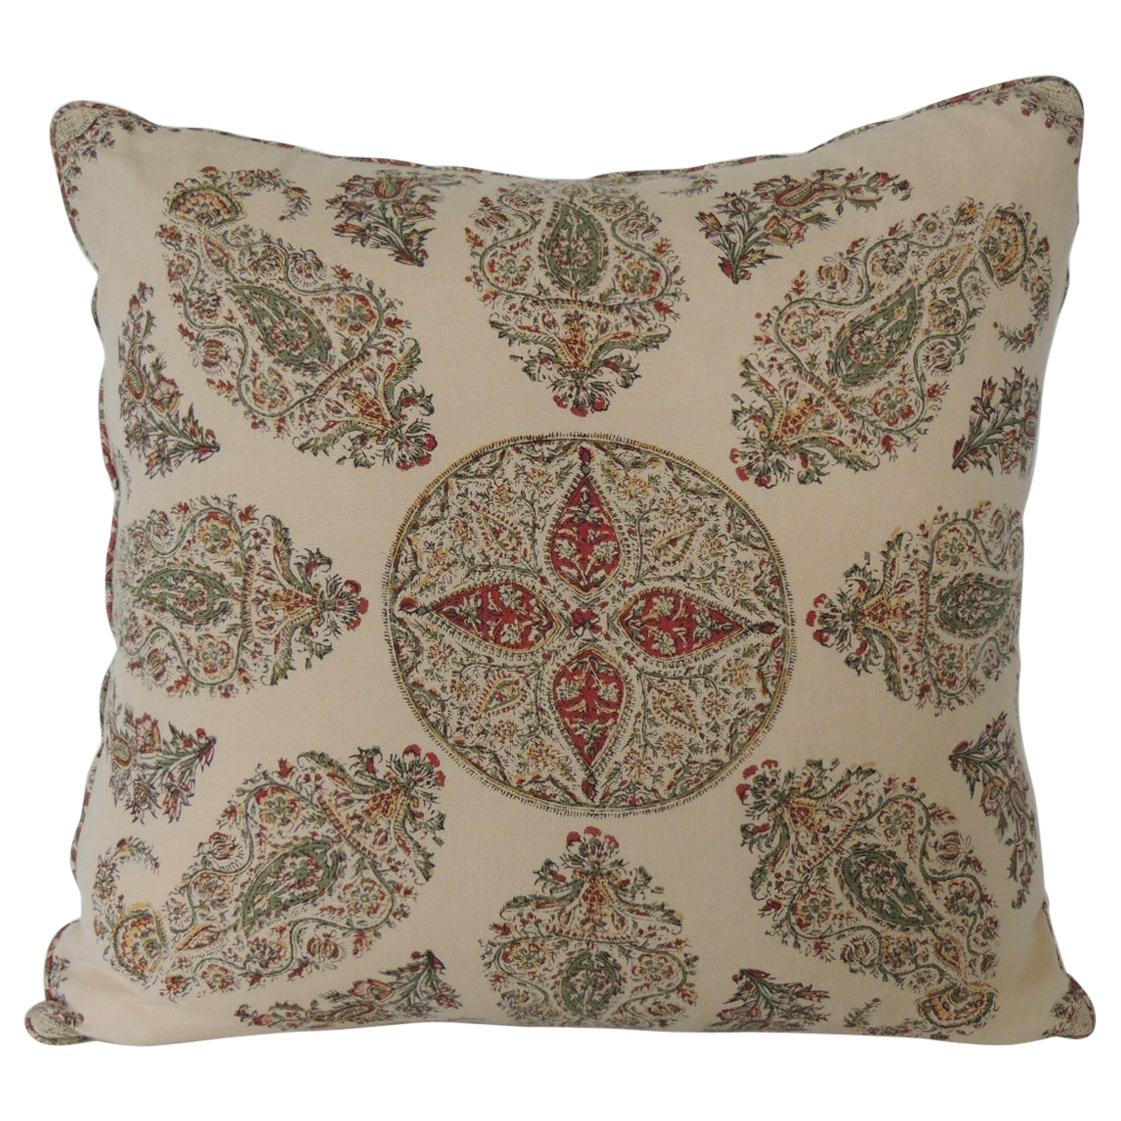 Green and Red Linen Paisley Decorative Square Pillow with Self-Welt